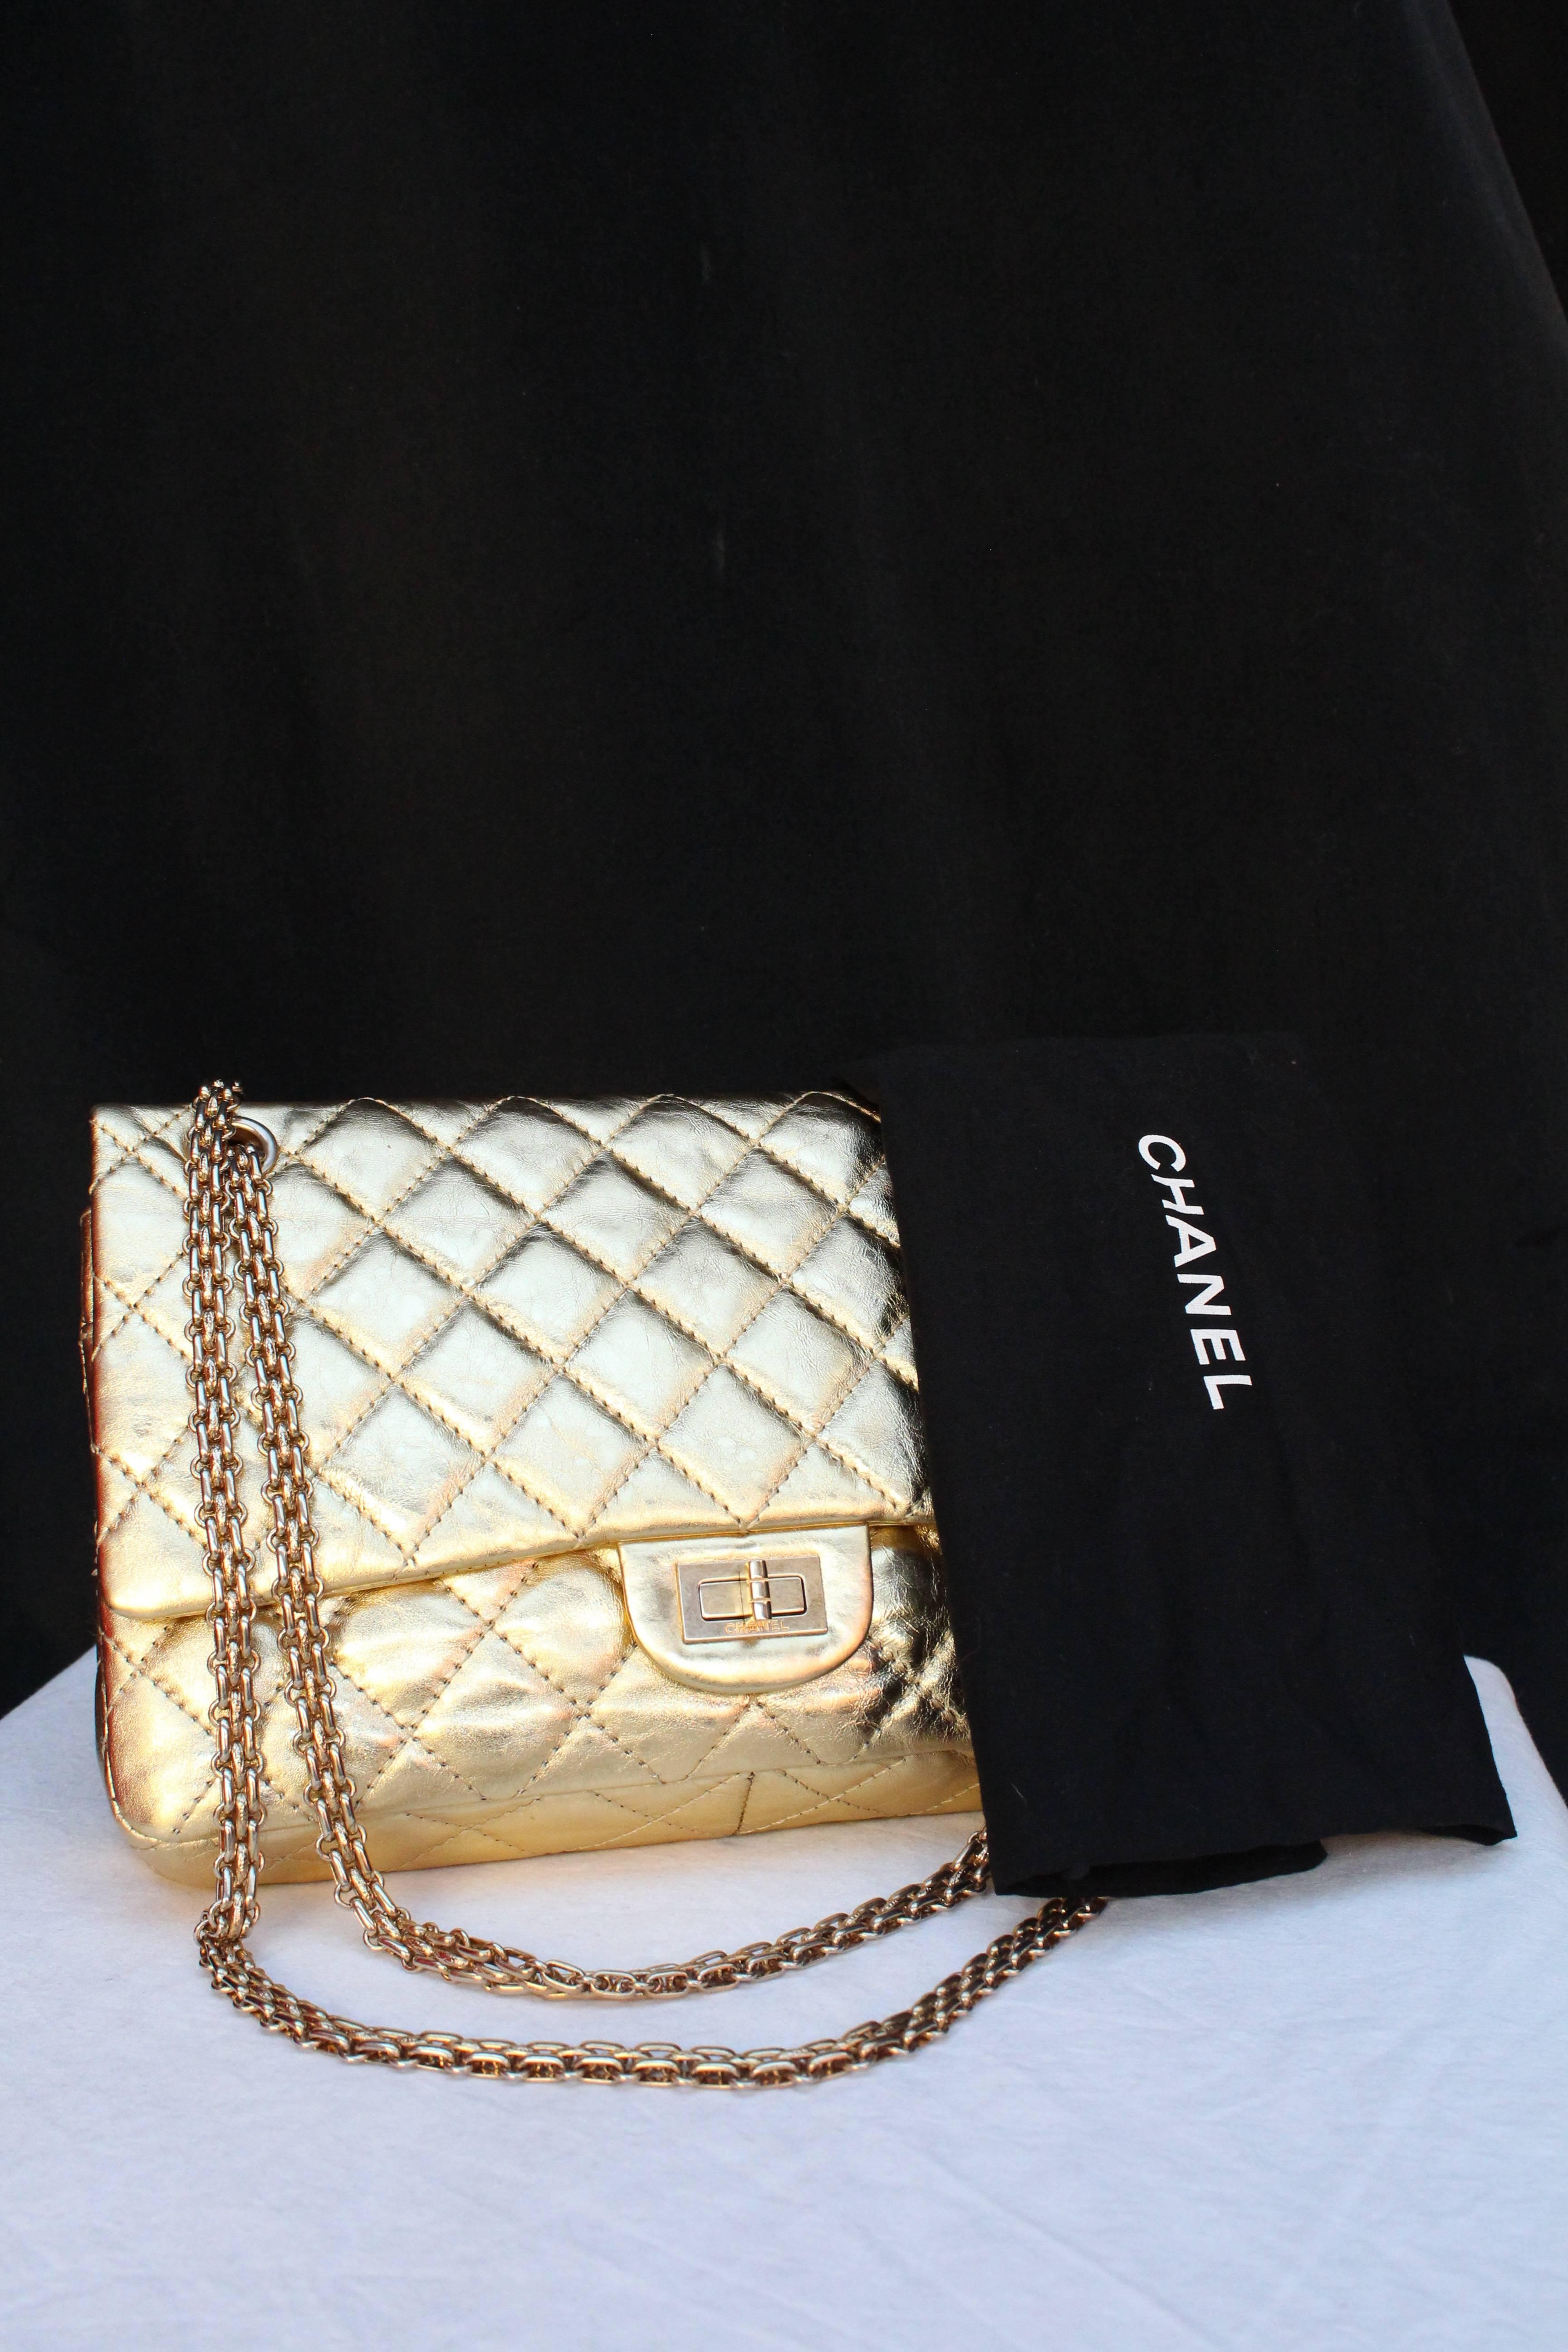 CHANEL (Made in France) 2.55 Model bag made of quilted golden leather with ruched/marbling effect. It can be worn double over the shoulder or single as cross-body bag. Back patch pocket. Gilded metal twist lock clasp closure. The first flap has a